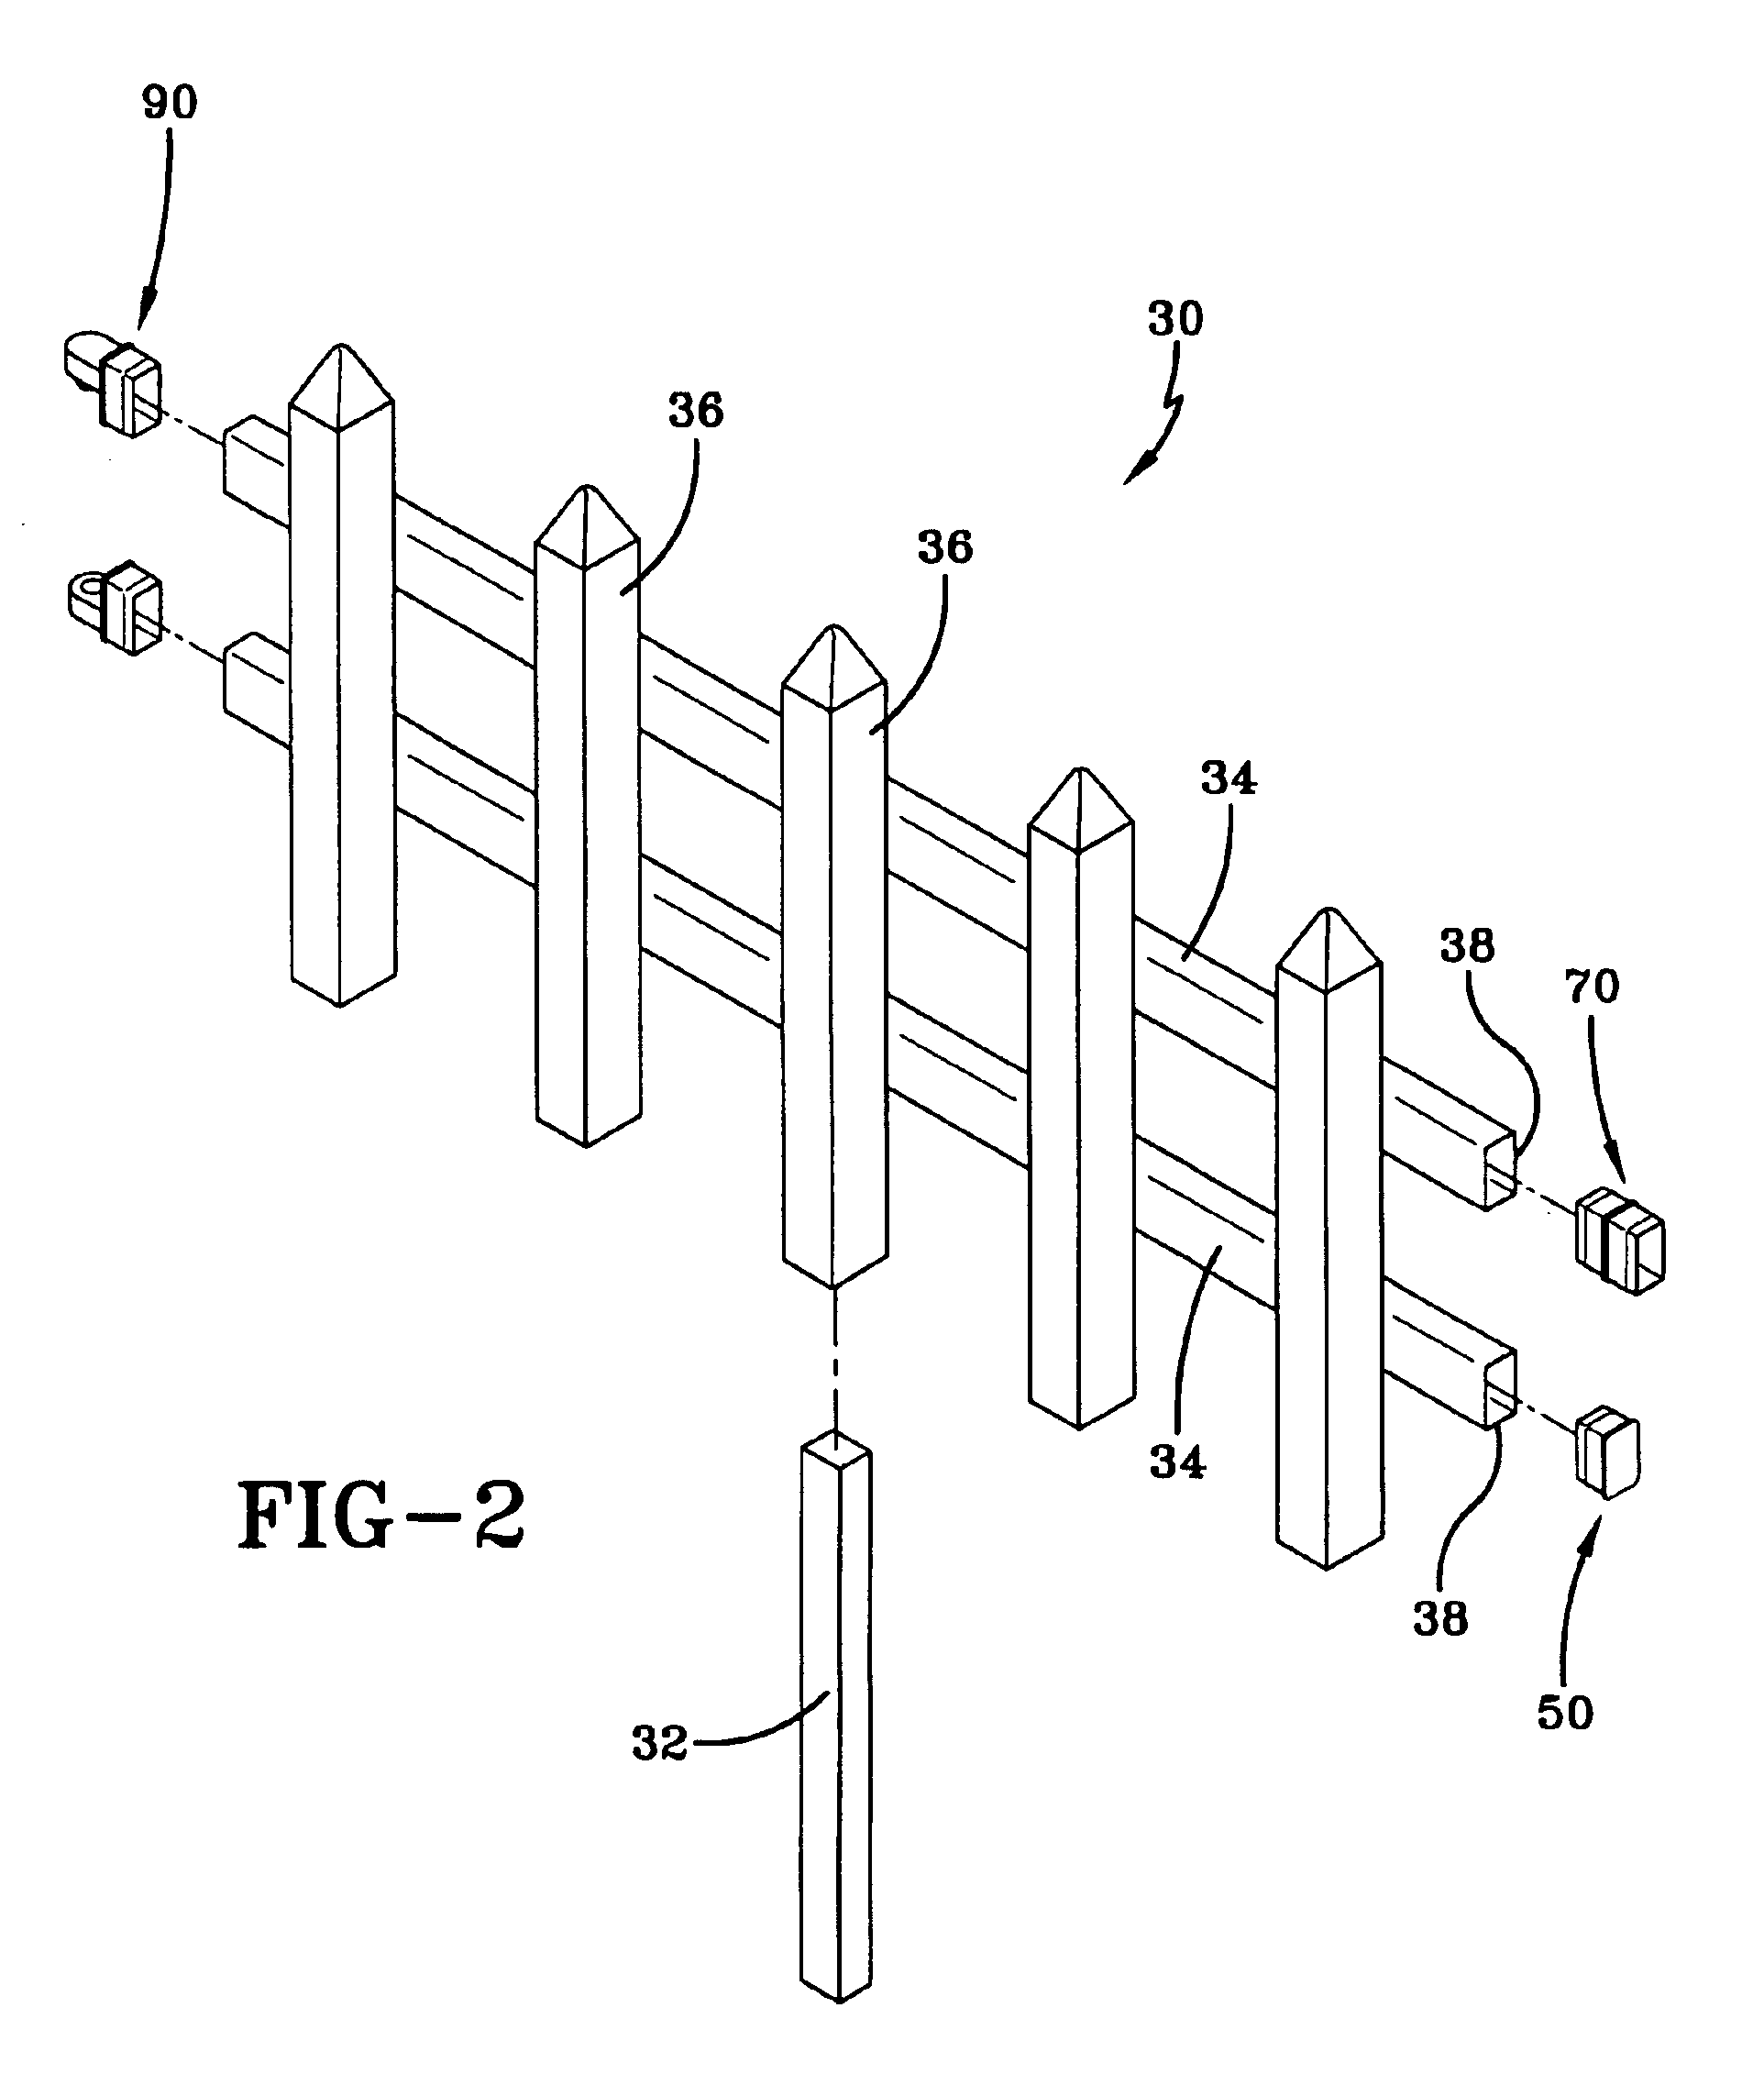 Fence assembly with connectors